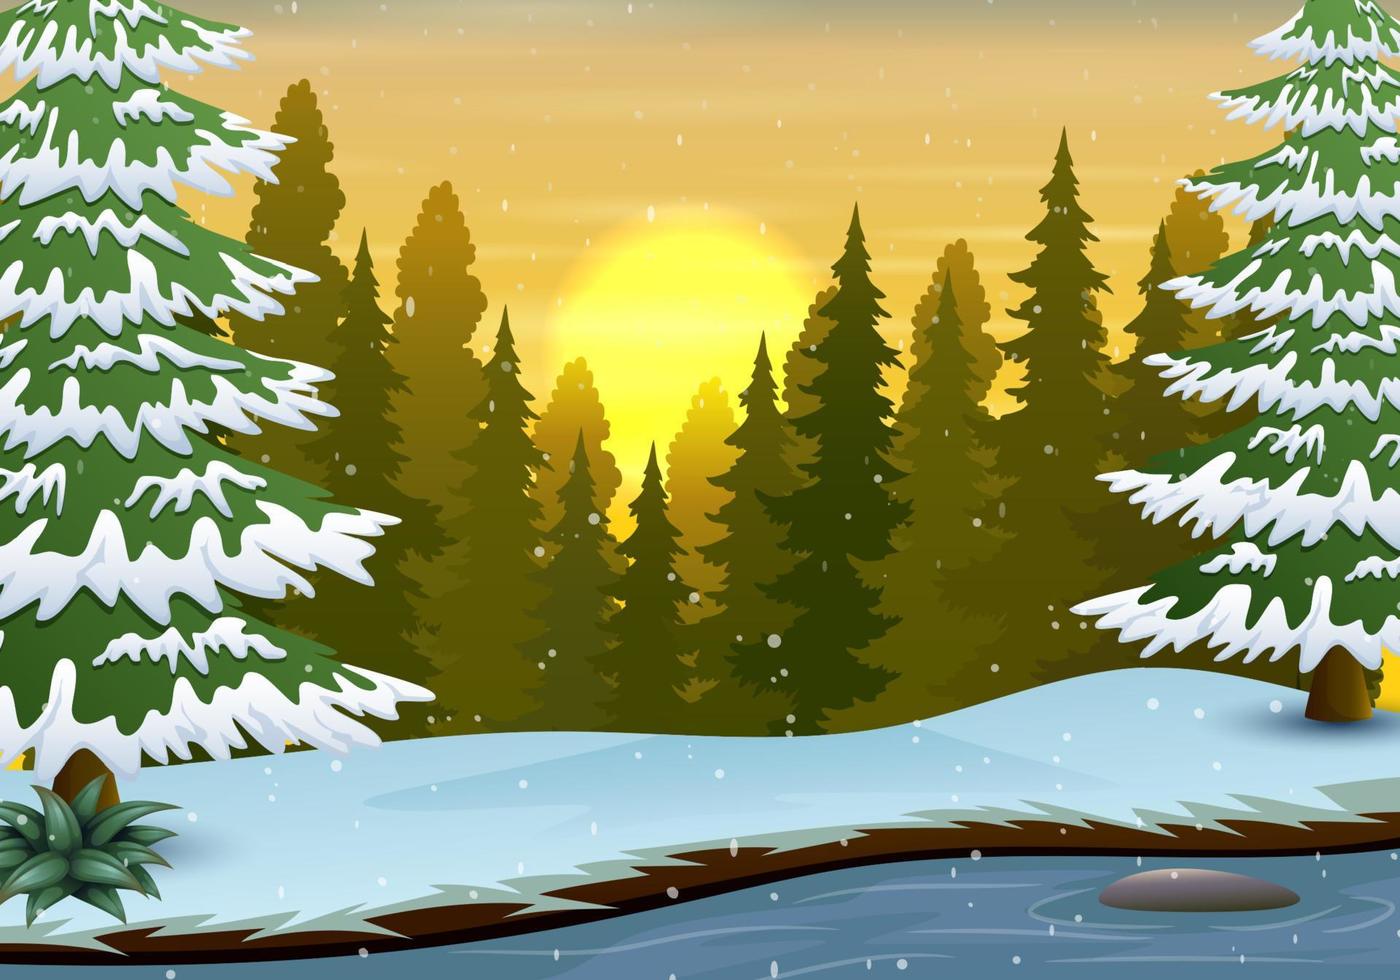 Winter scene with river and forest background vector